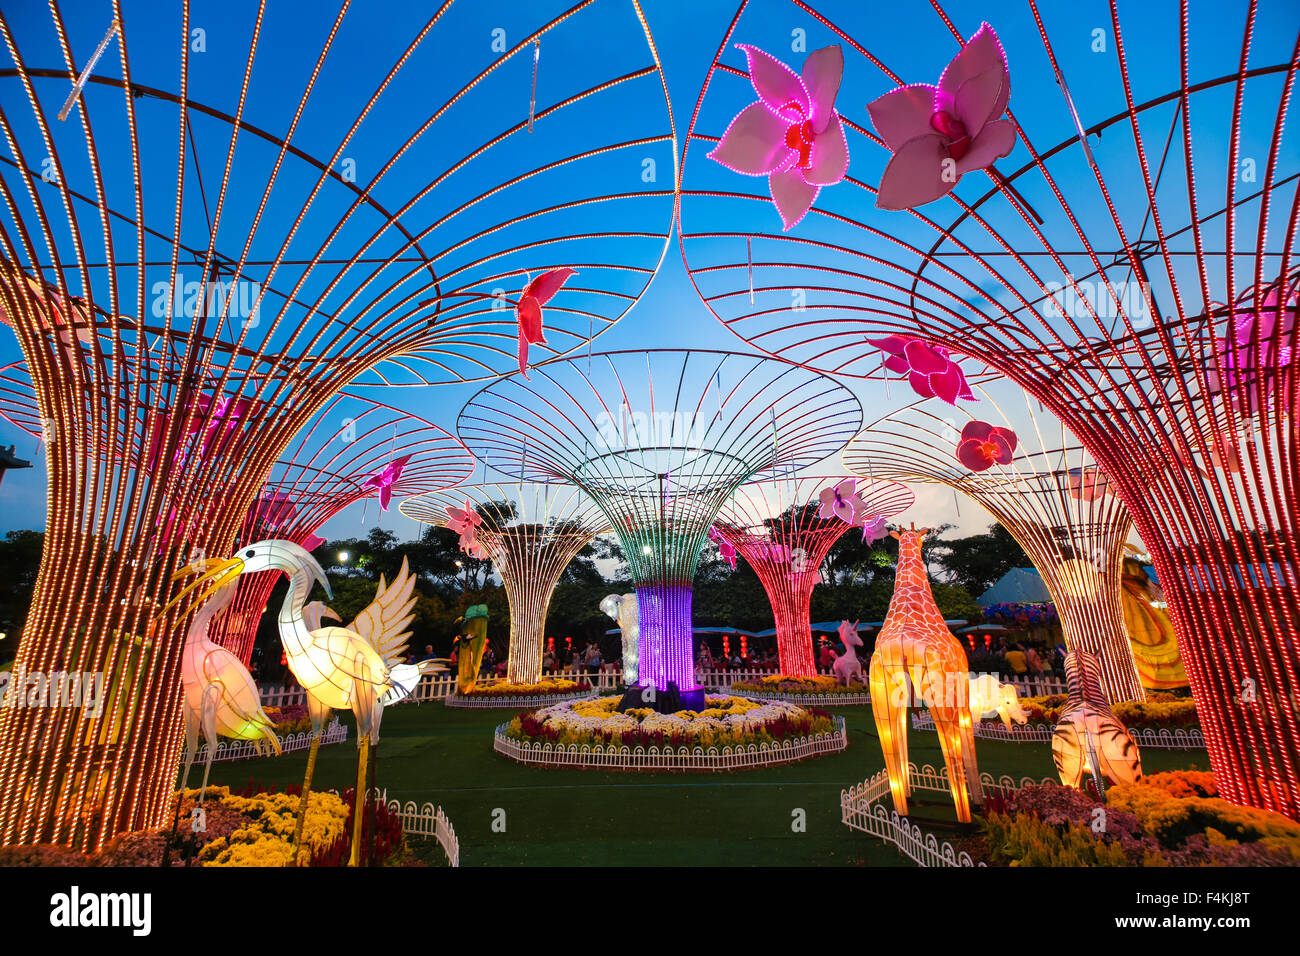 LED metal tree and lantern animal decorations at FGS temple, Jenjarom Malaysia during chinese new year 2014. Stock Photo